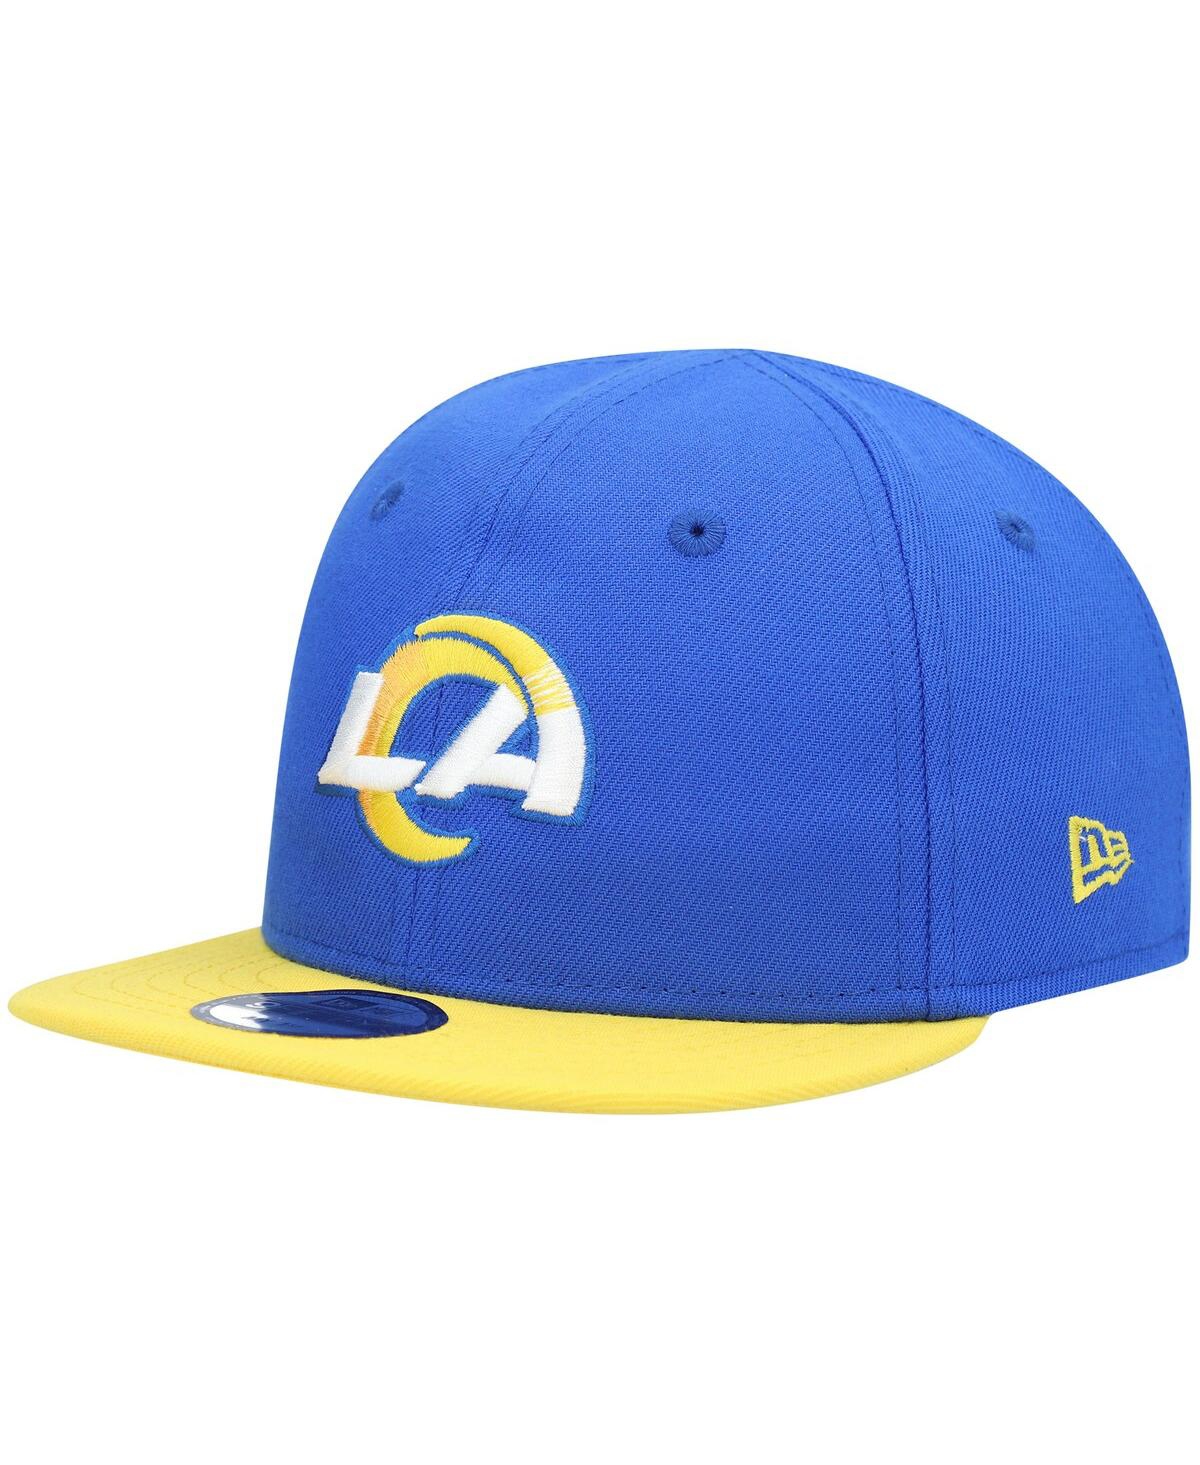 Shop New Era Boys And Girls Infant  Royal, Gold Los Angeles Rams My 1st 9fifty Adjustable Hat